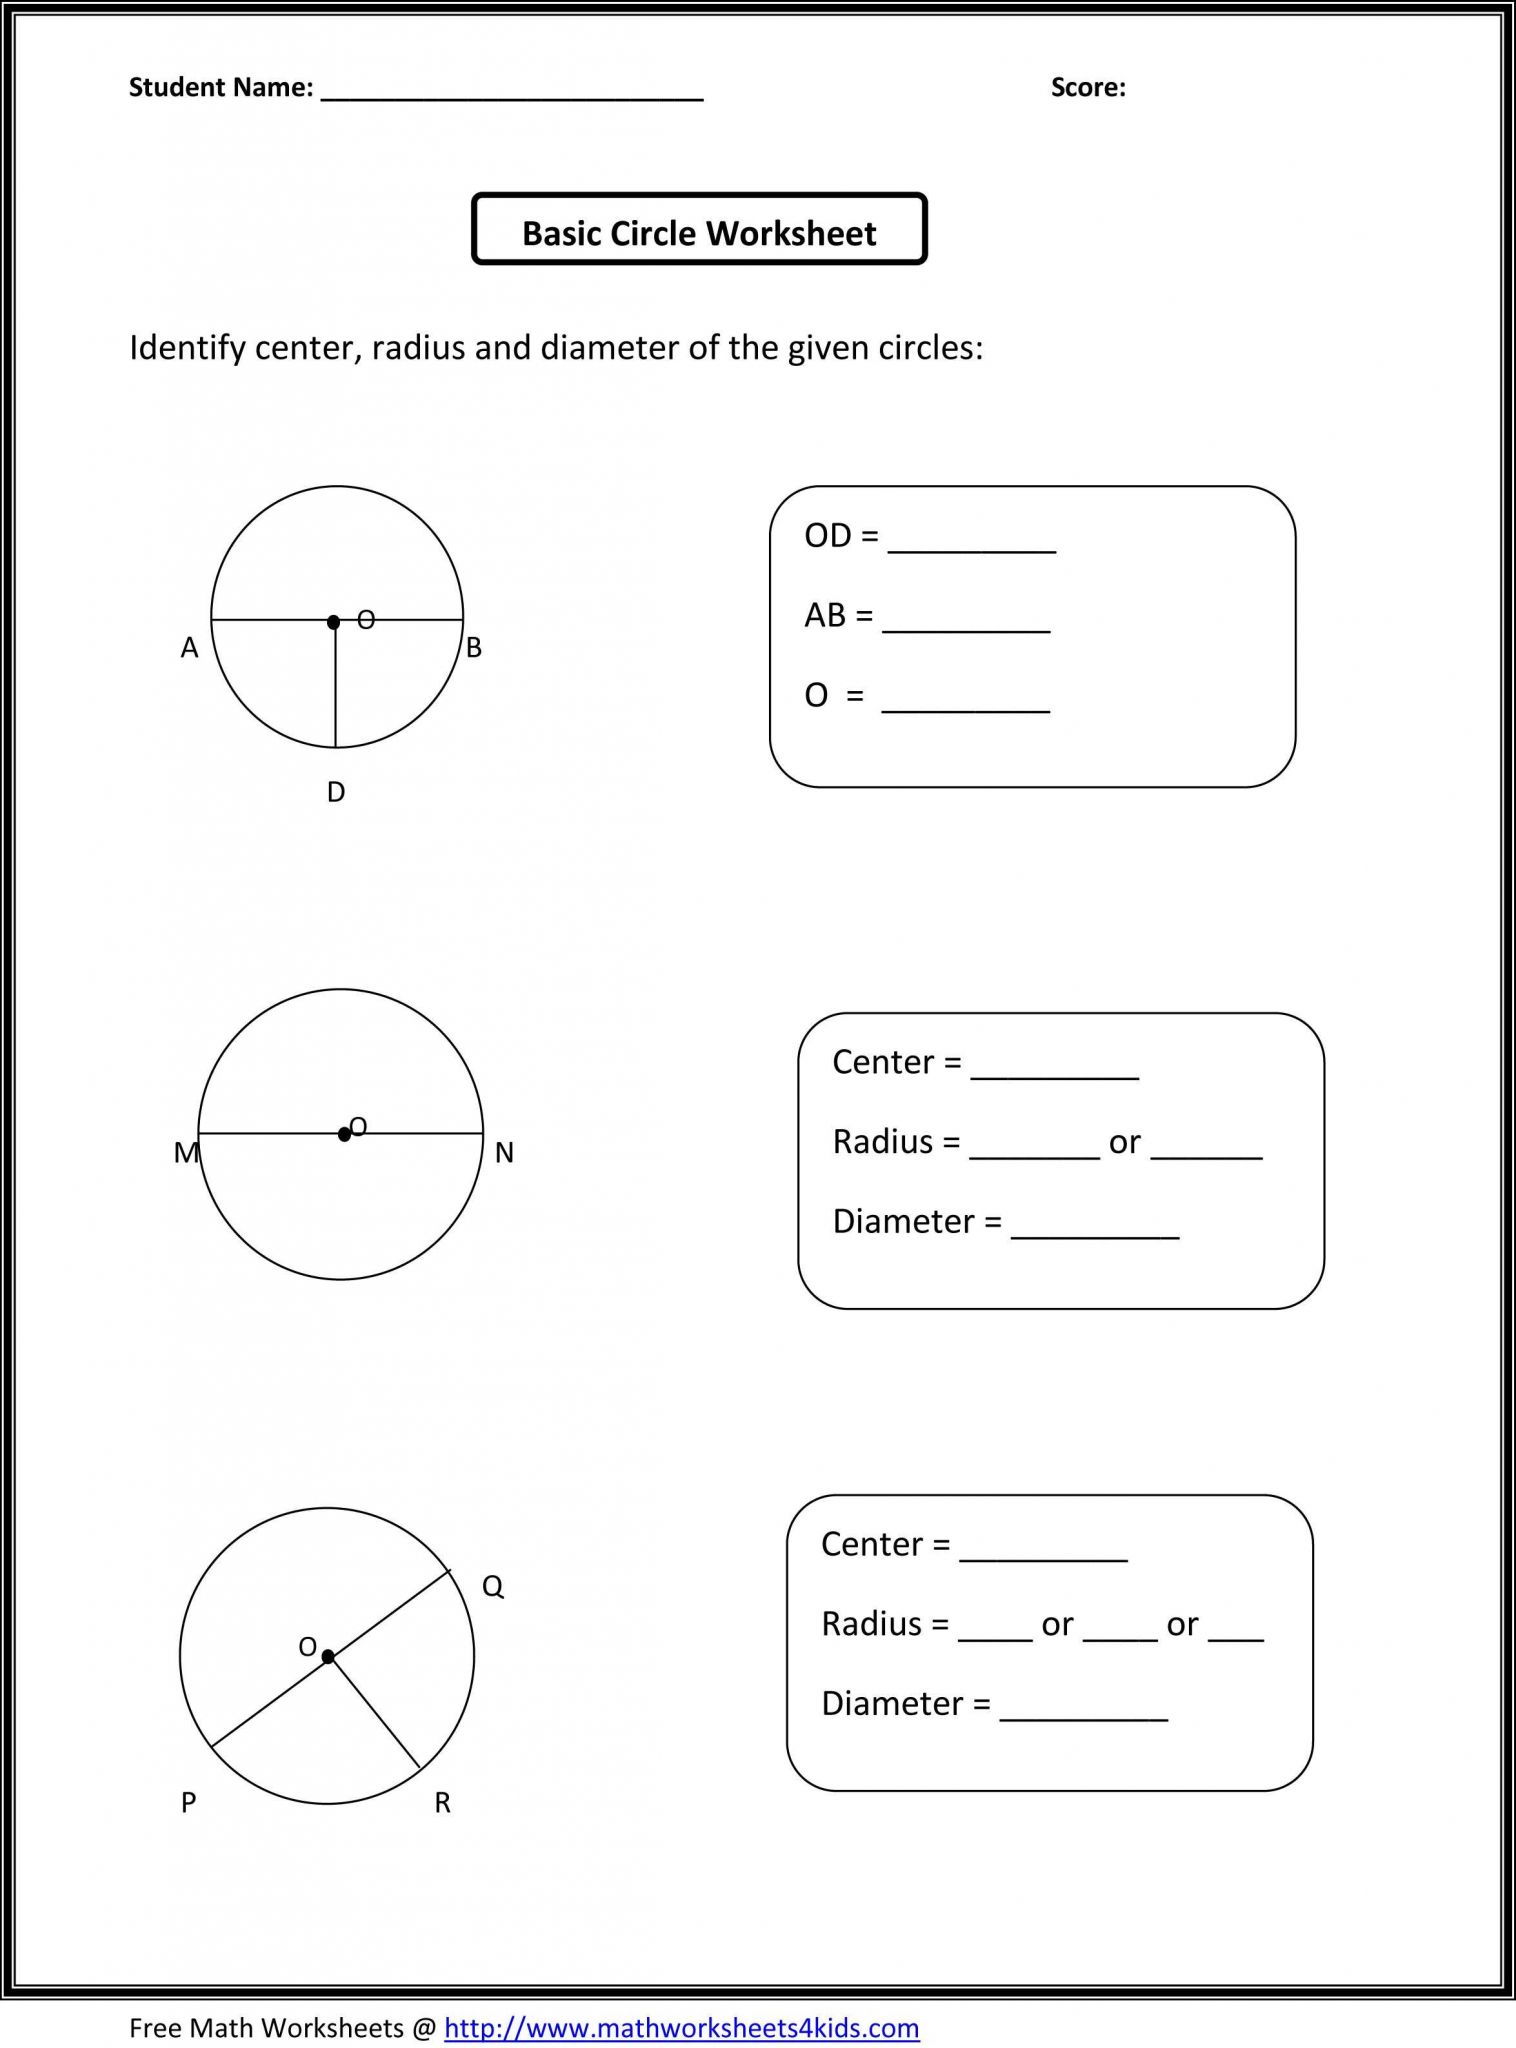 History Channel French Revolution Worksheet Answers together with American Revolution Worksheets Gallery Worksheet for Kids In English